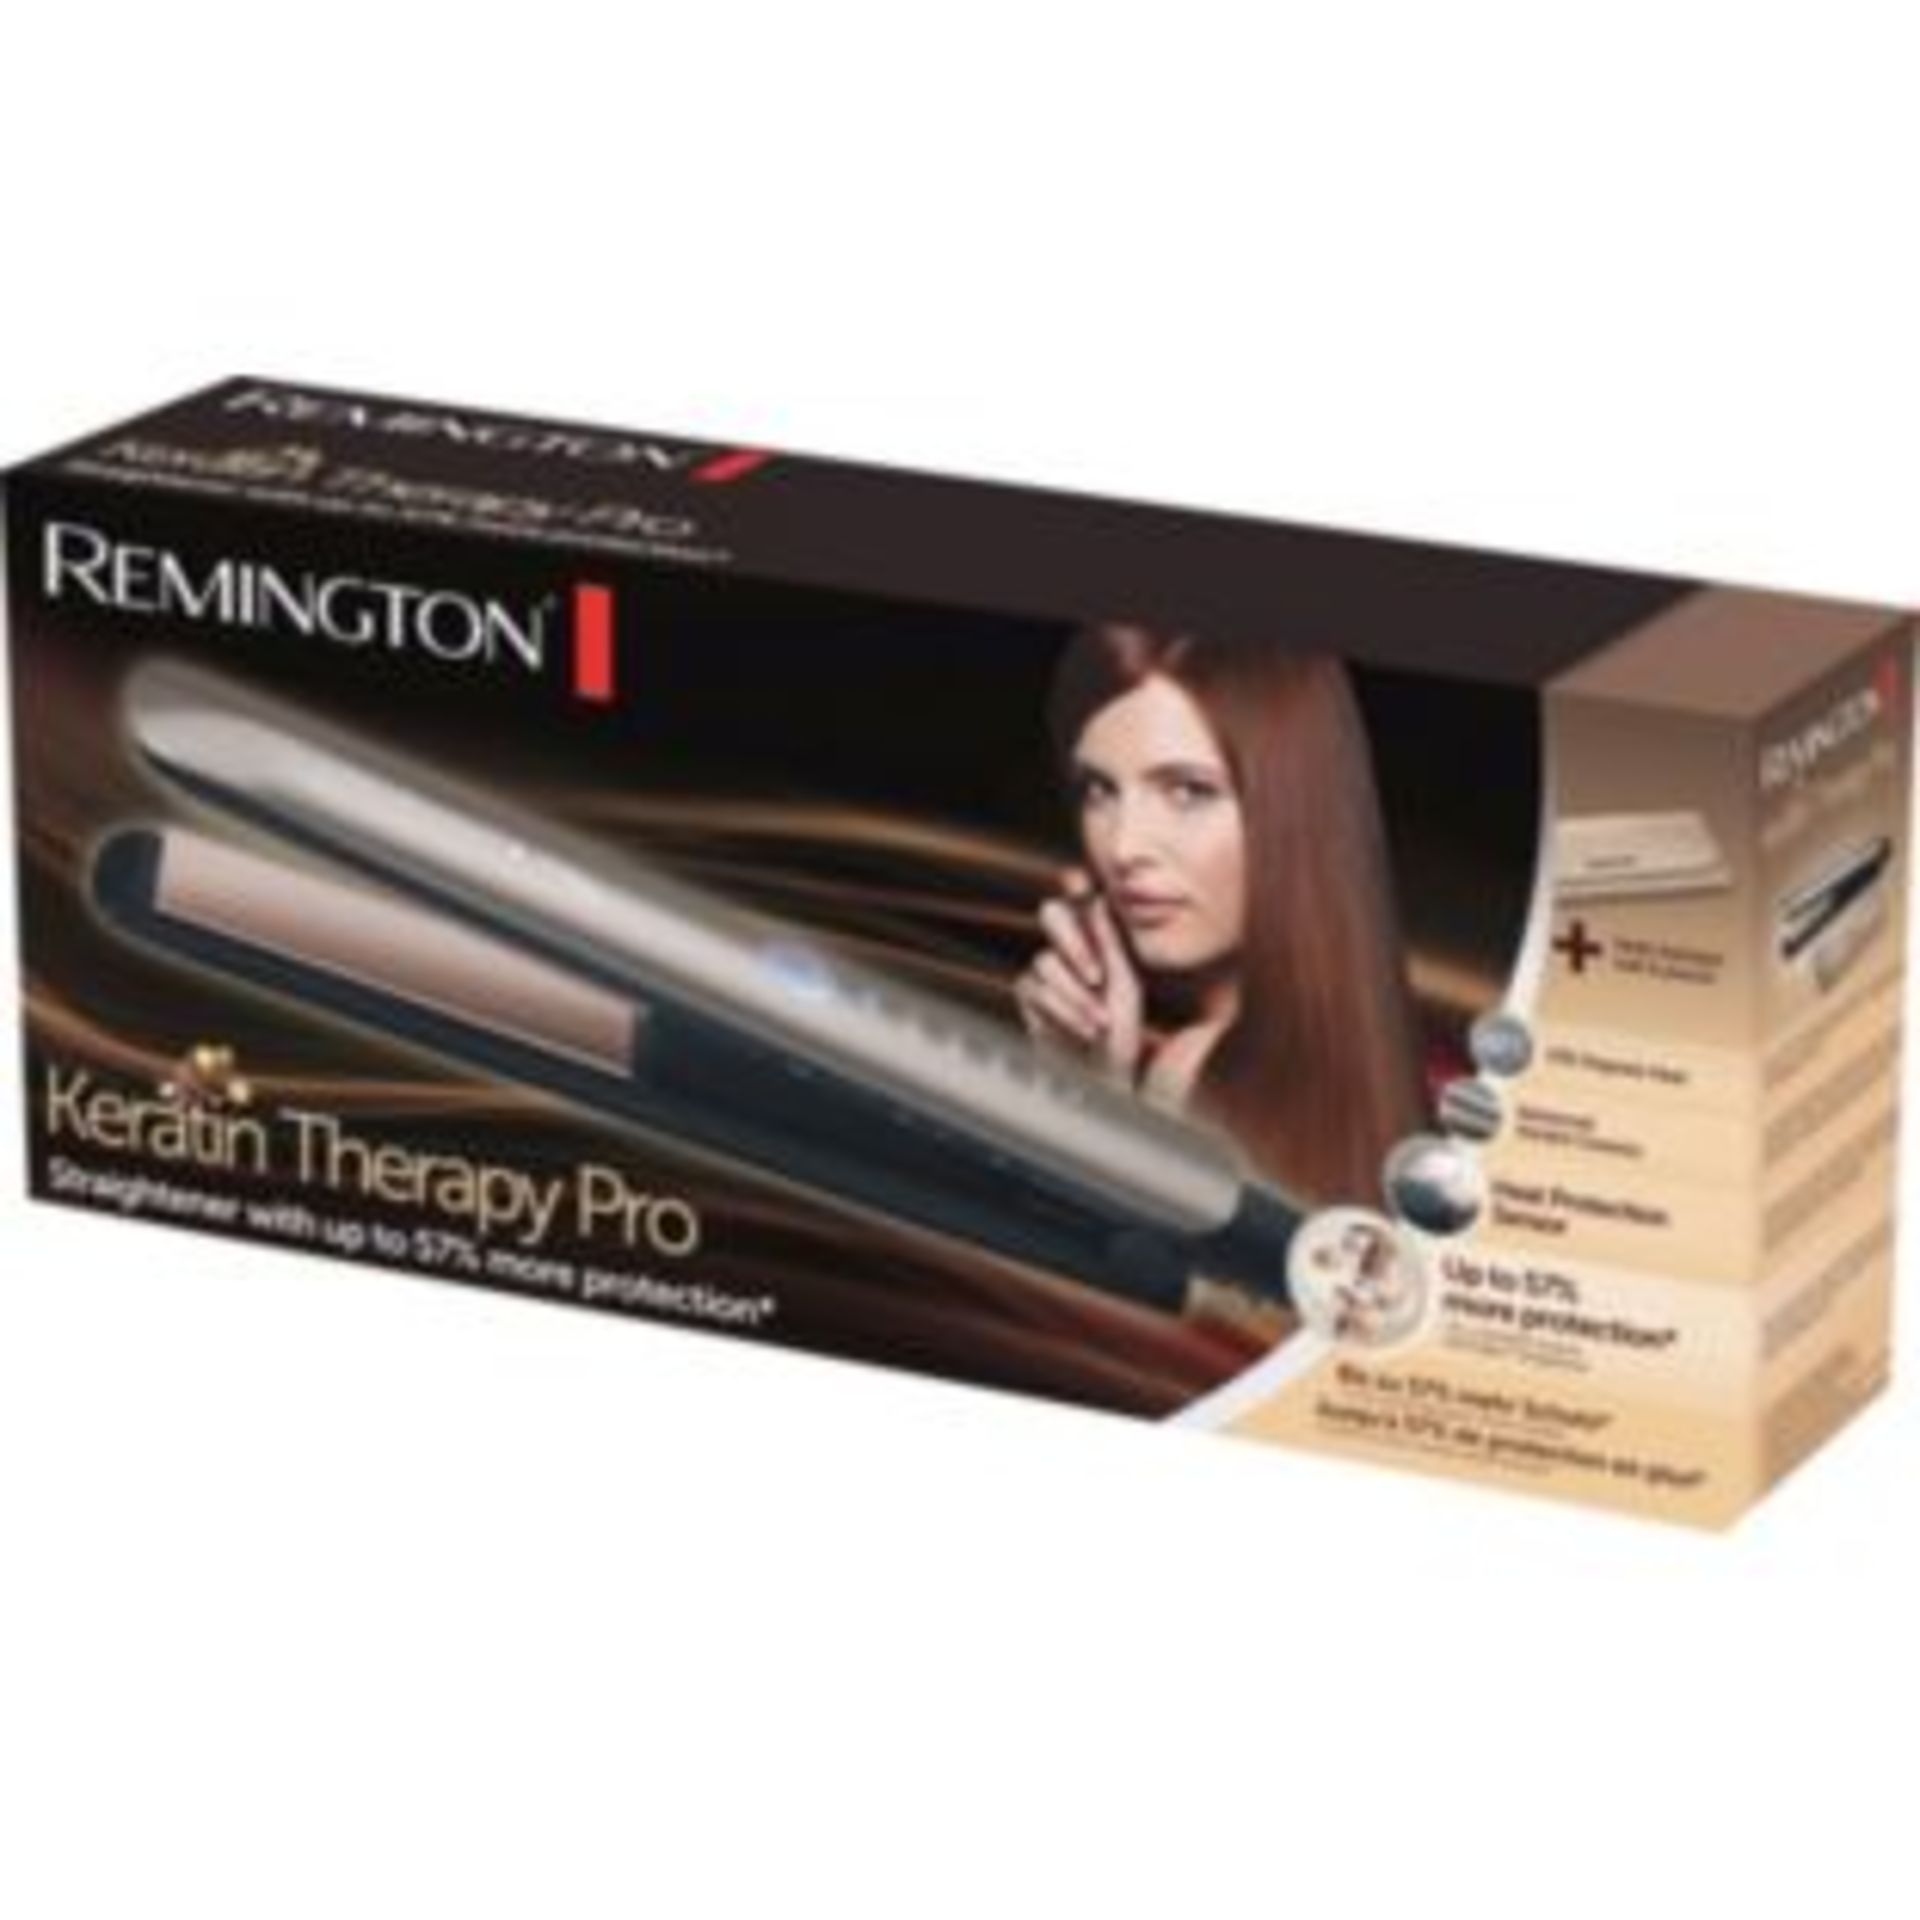 V *TRADE QTY* Brand New Remington Keratin Therapy Pro Straighteners With 57% More Protection (As - Image 2 of 2